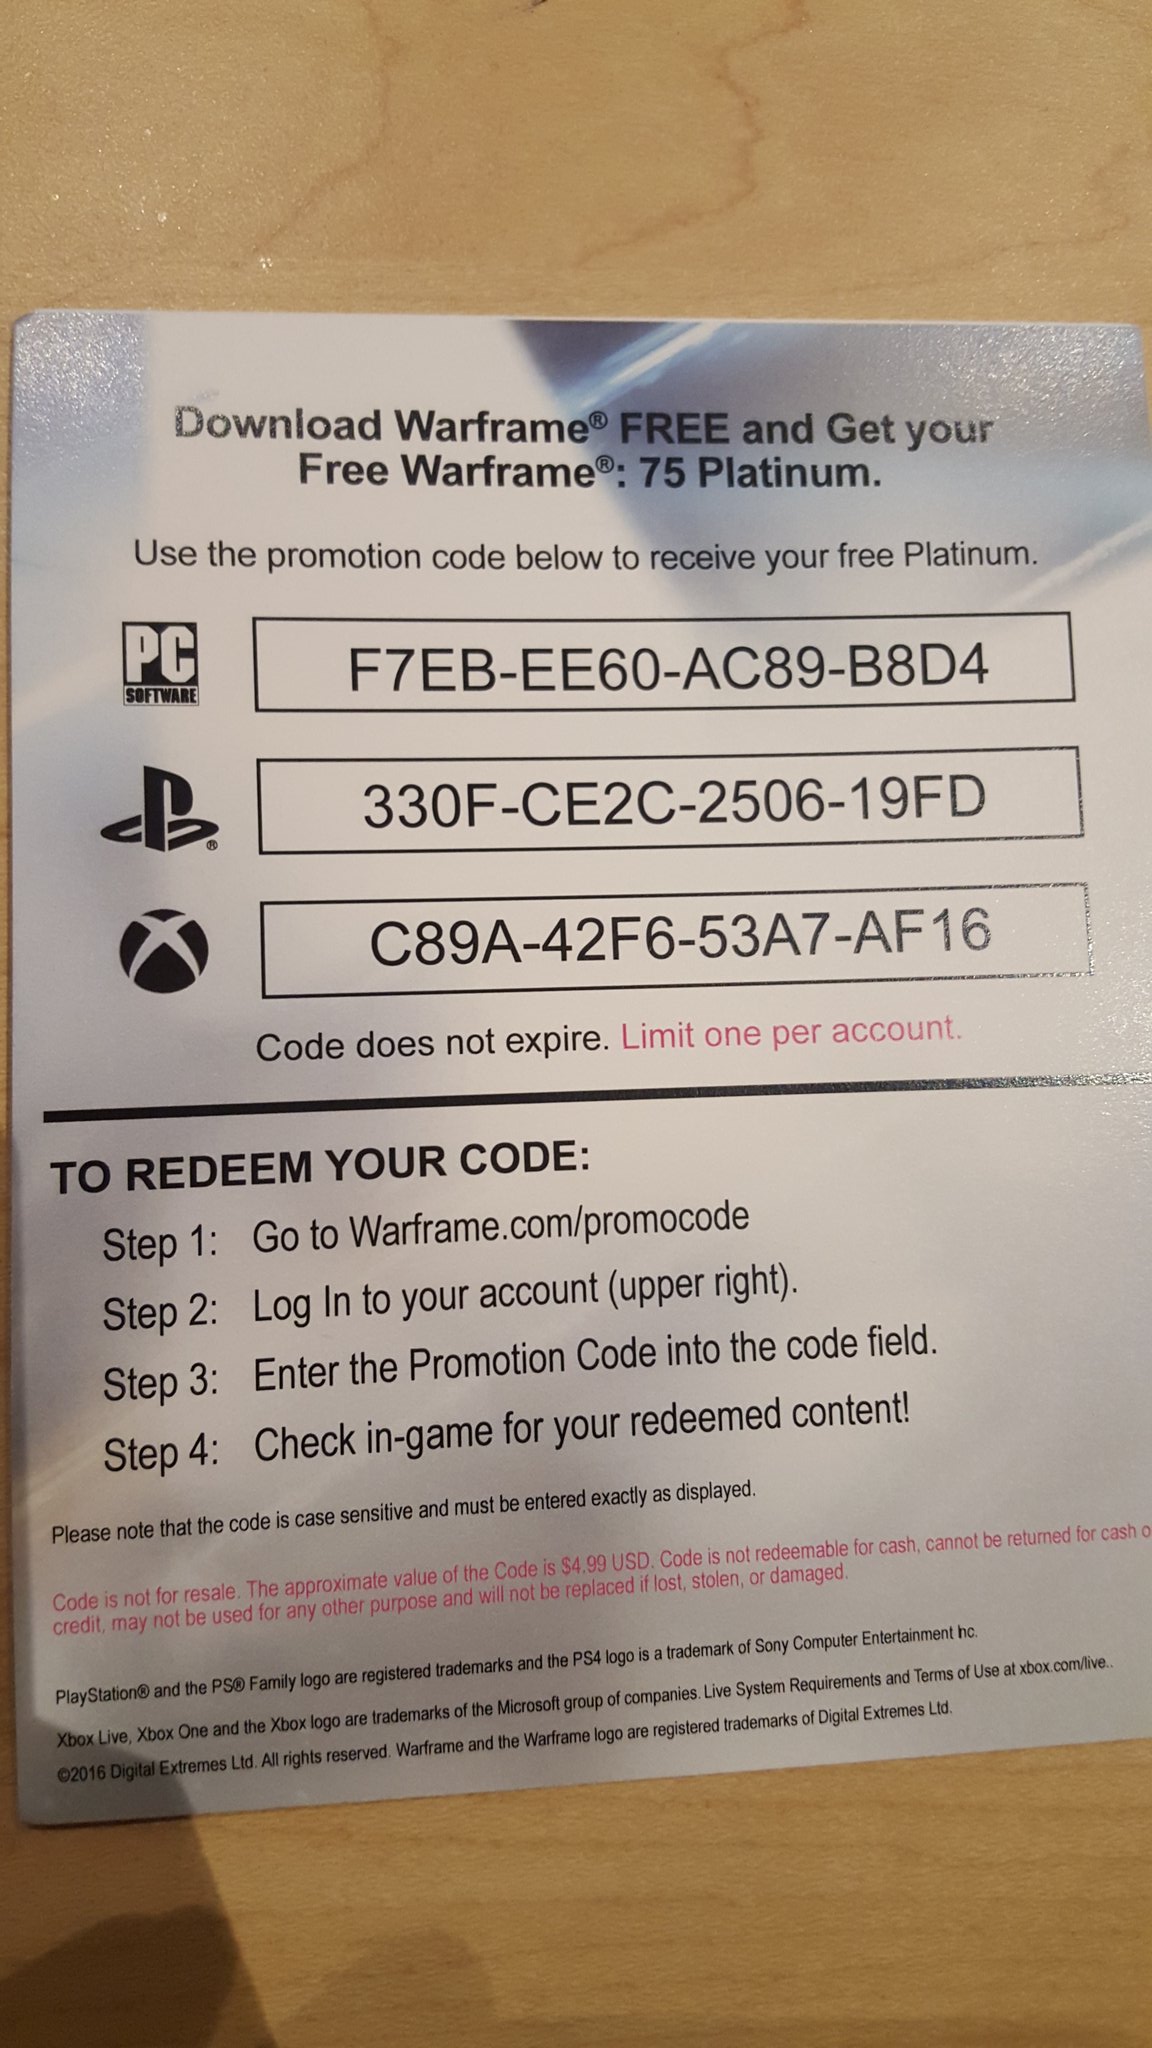 WARFRAME on X: More #PAXEast Platinum codes up for grabs to the